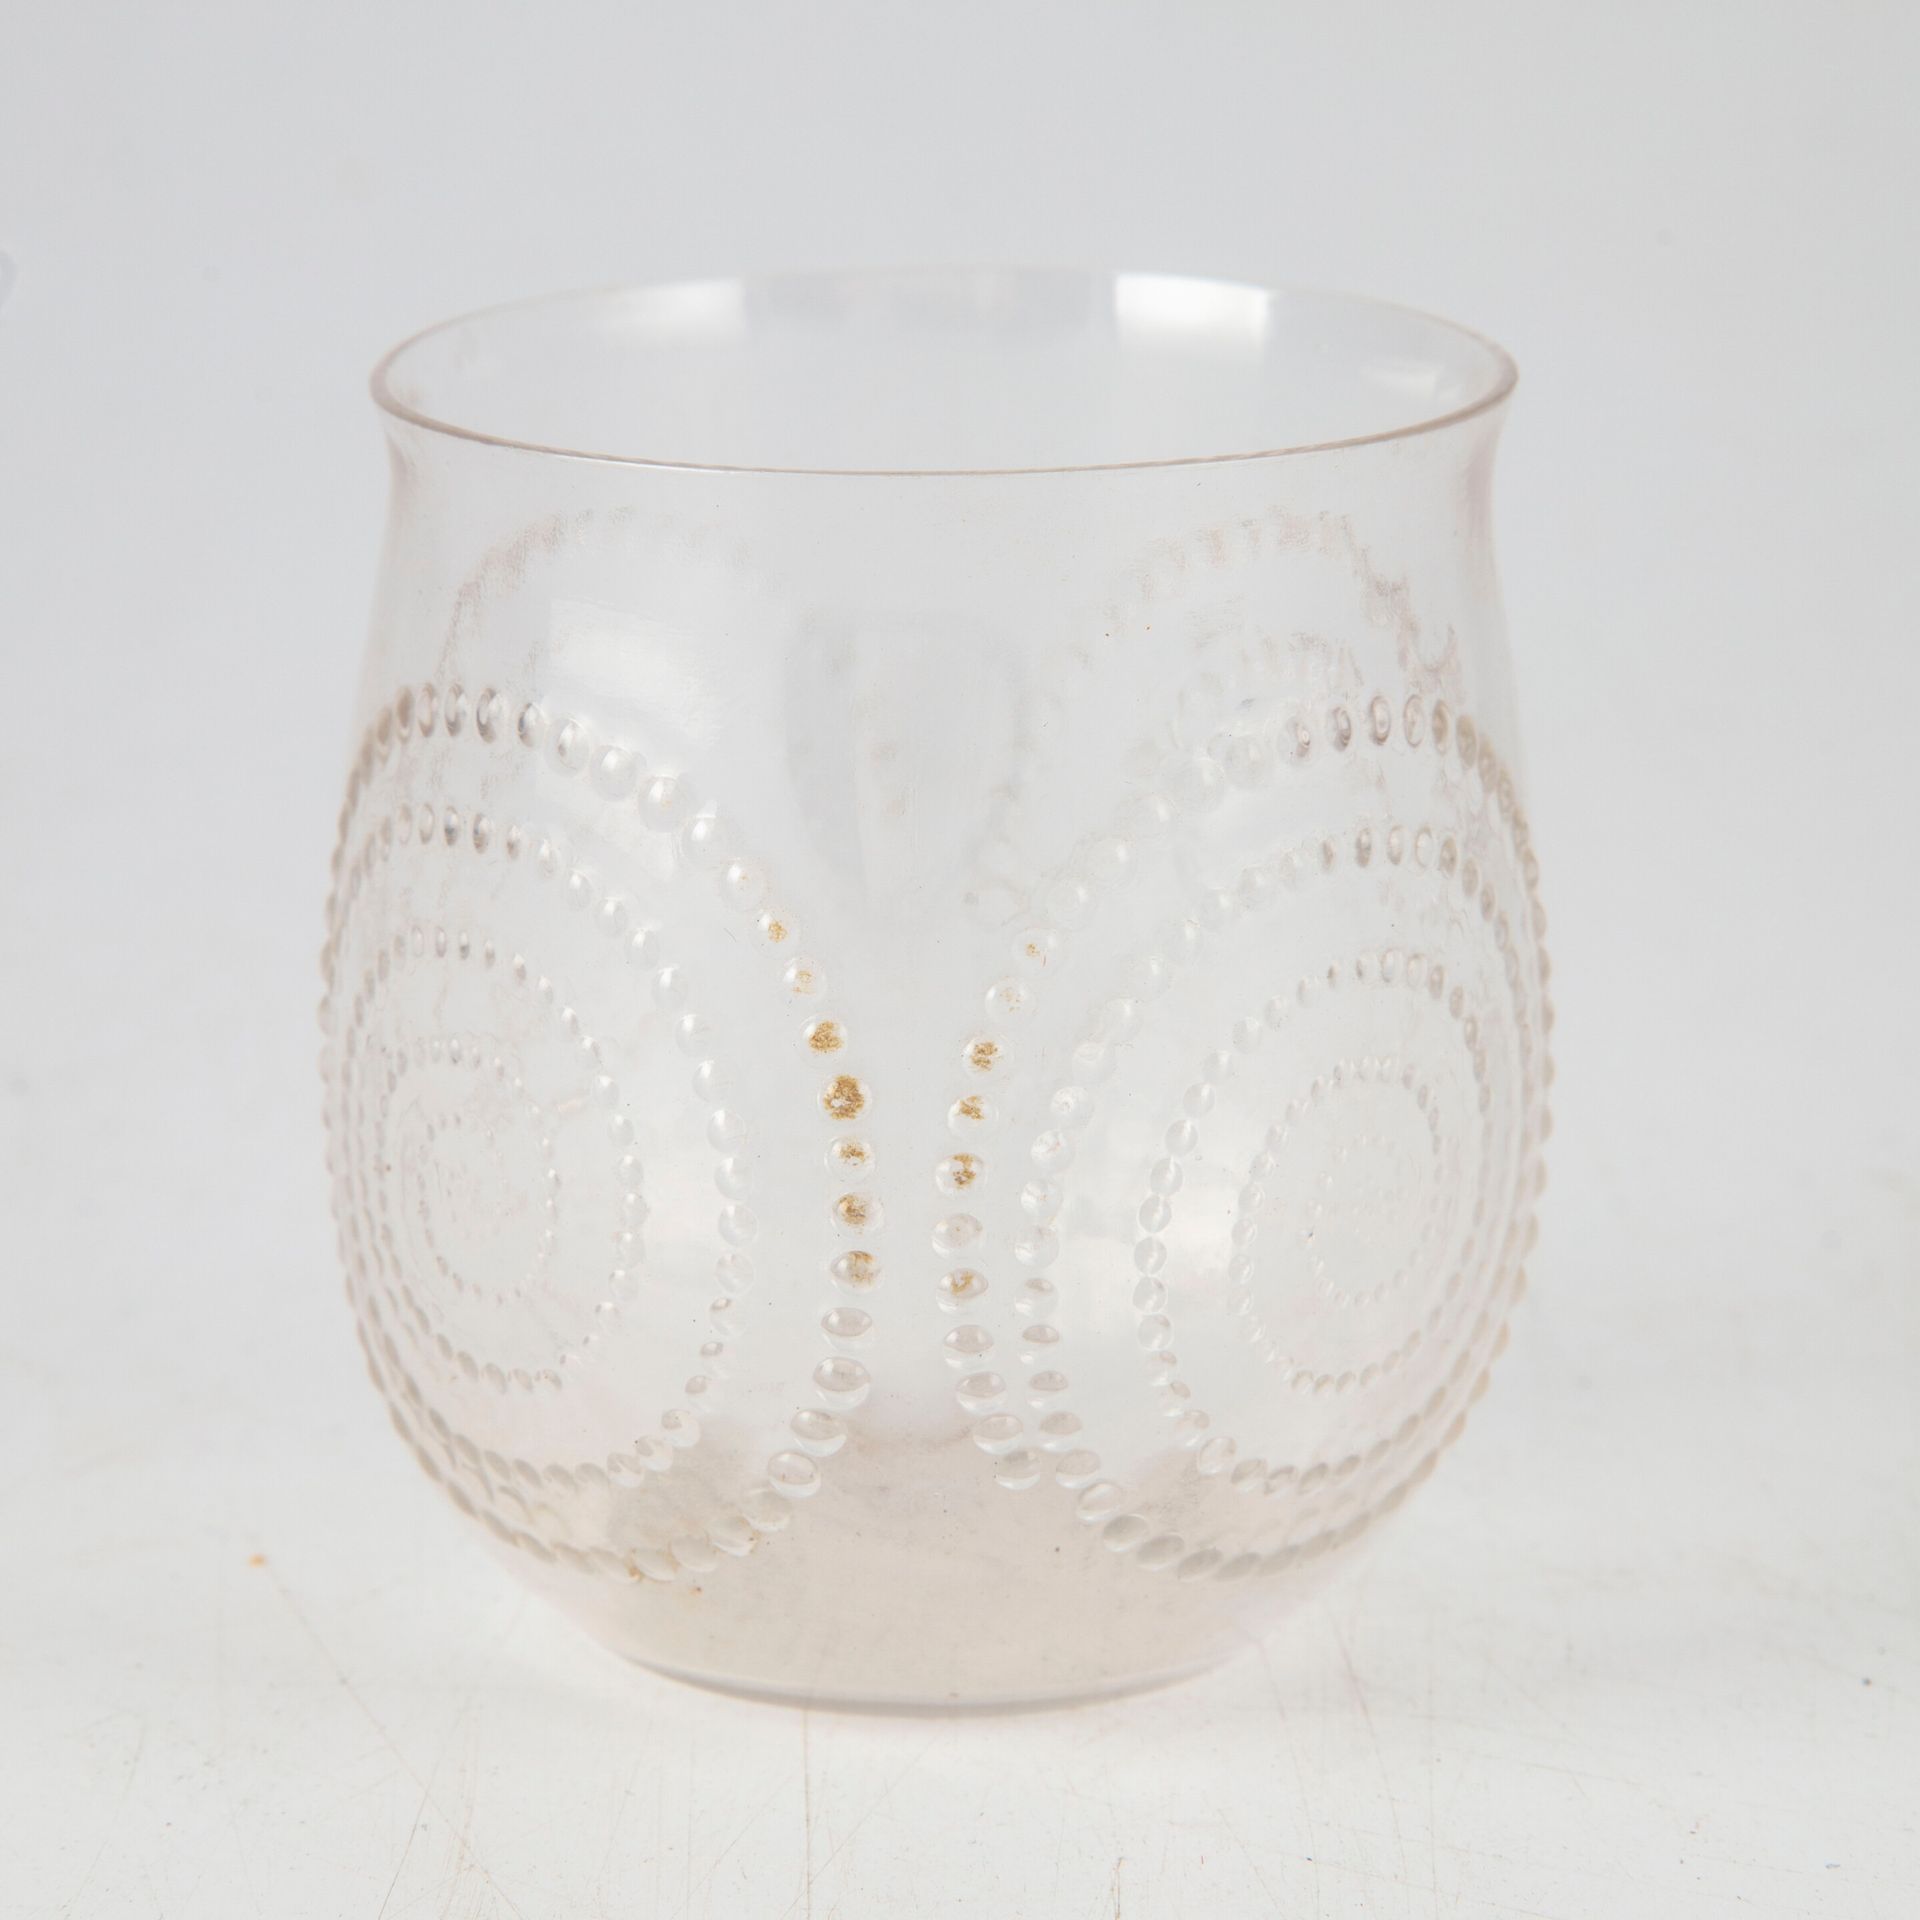 Null René LALIQUE

Glass decorated with spirals of pearls